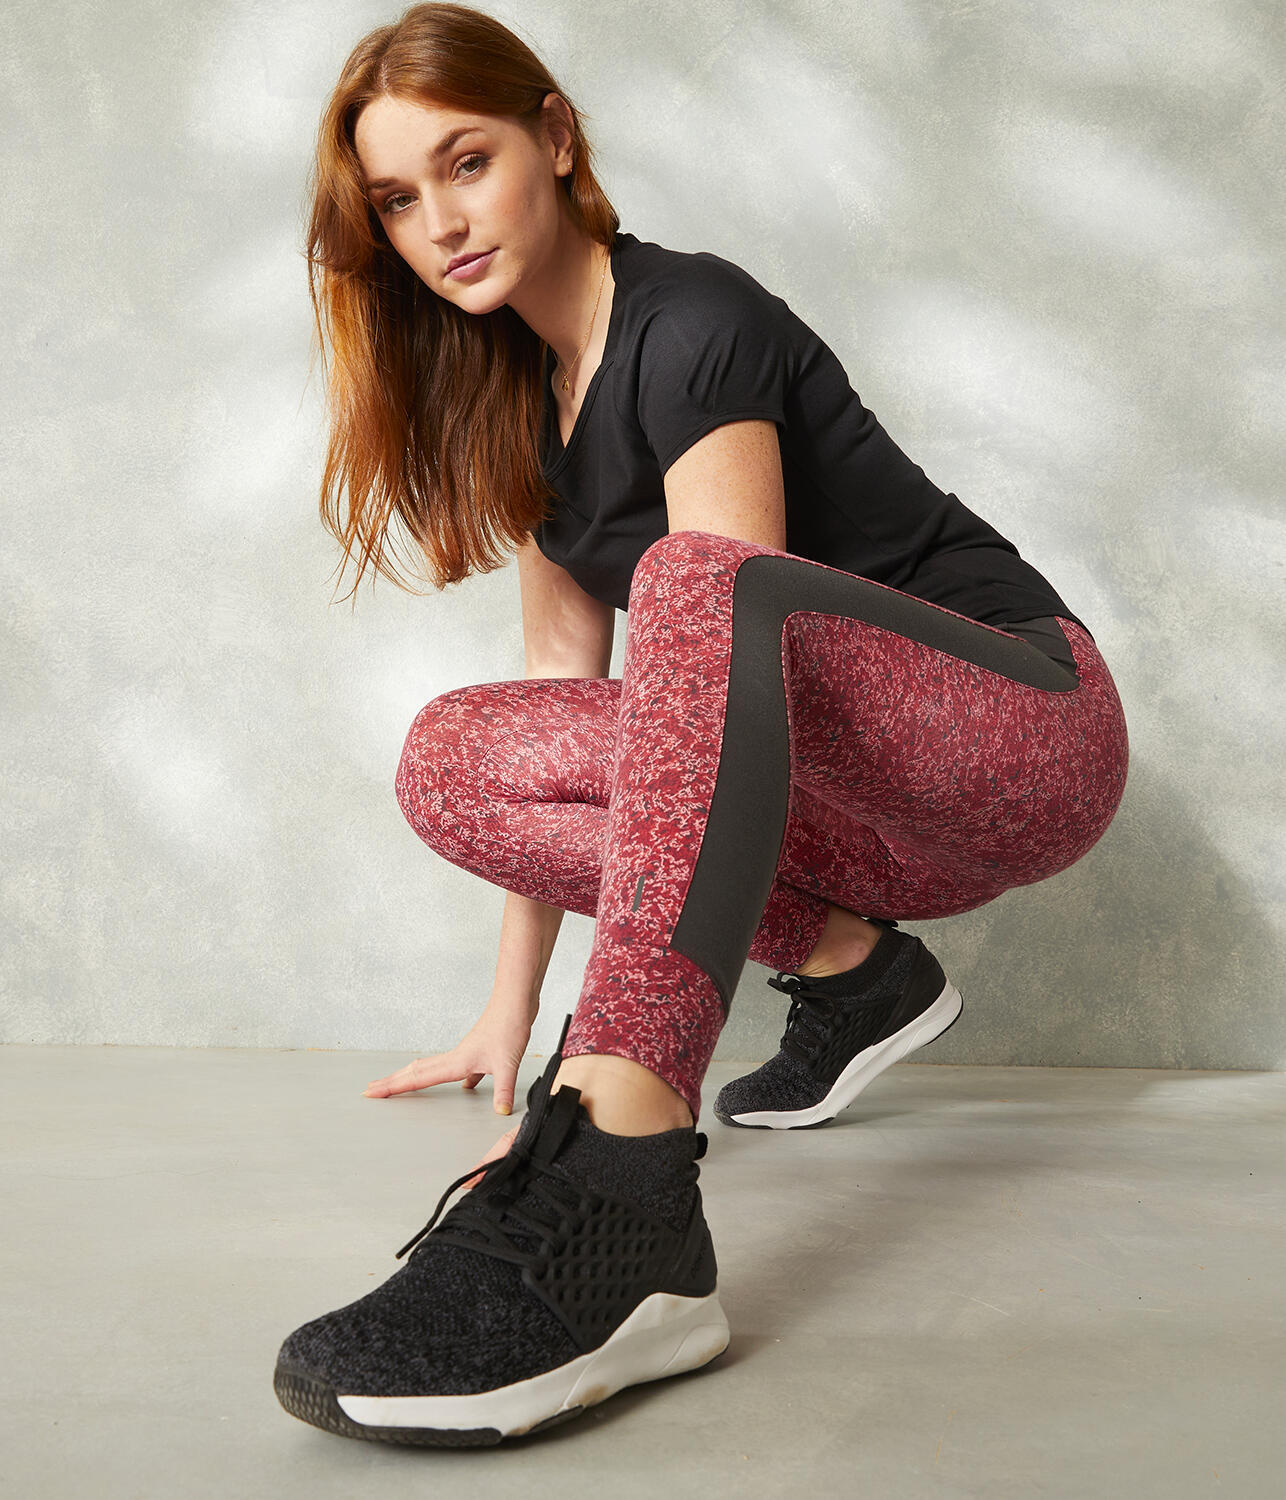 What Are The Different Types Of Lululemon Leggings? – solowomen